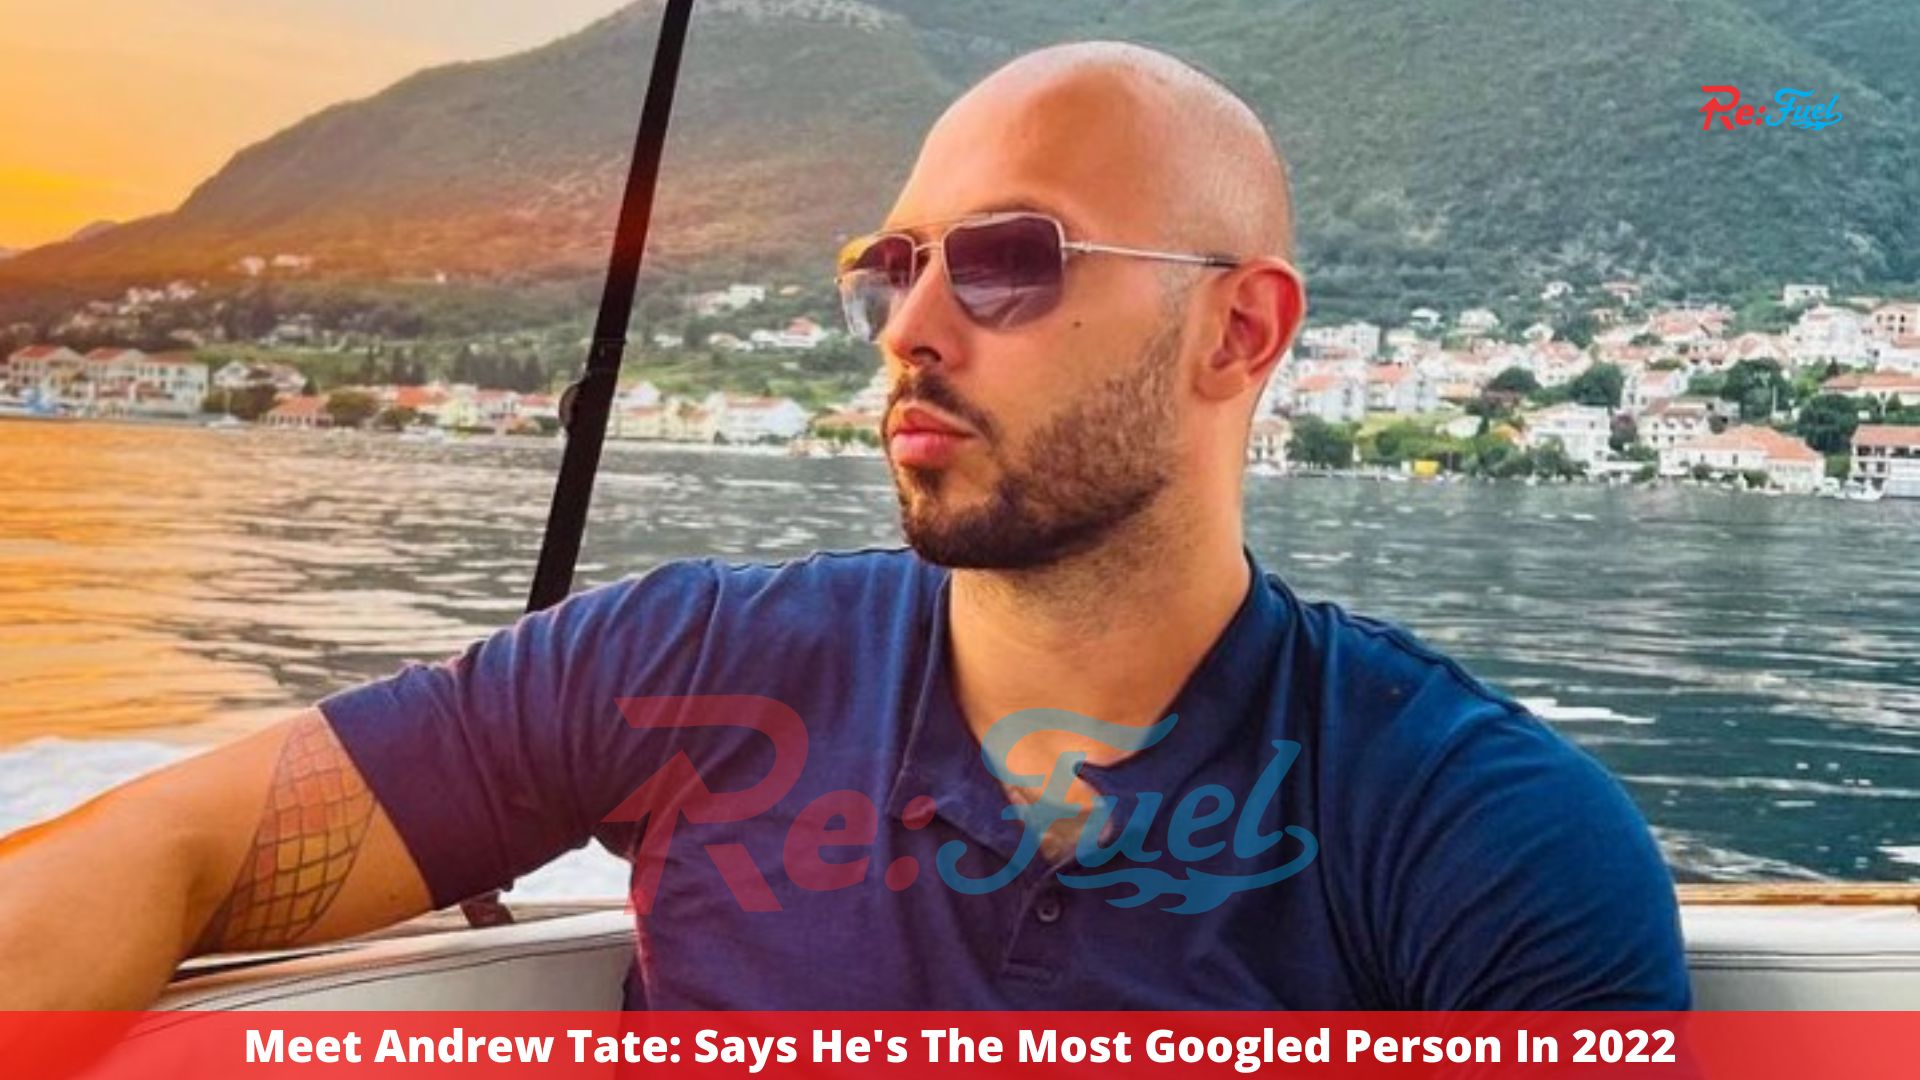 Meet Andrew Tate: Says He's The Most Googled Person In 2022